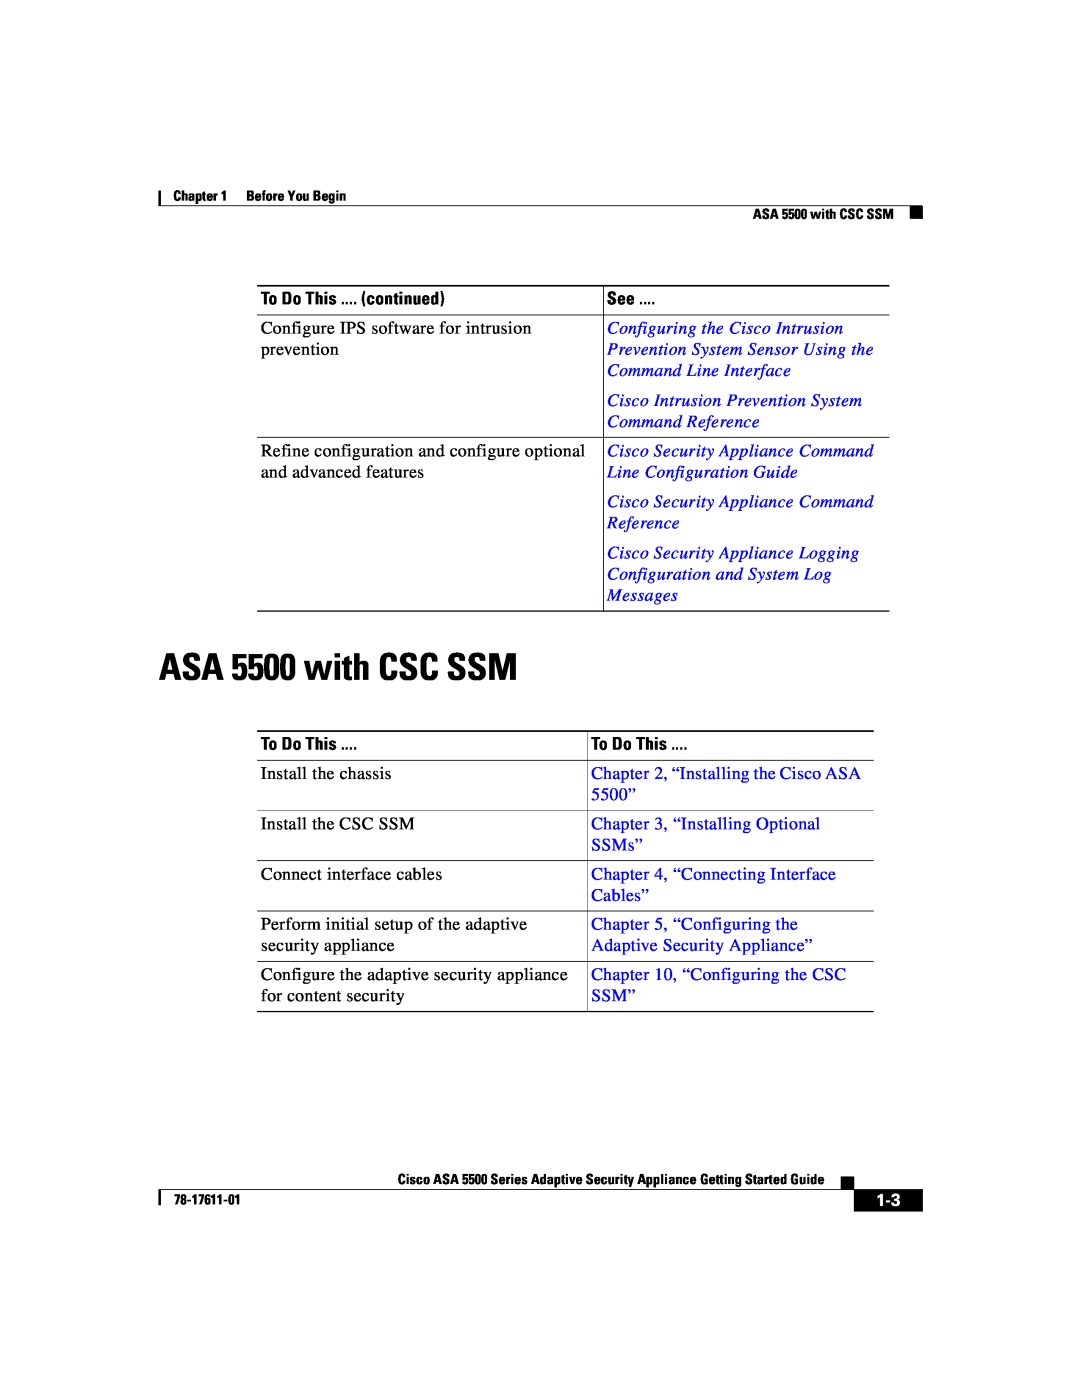 Cisco Systems manual ASA 5500 with CSC SSM, To Do This .... continued 